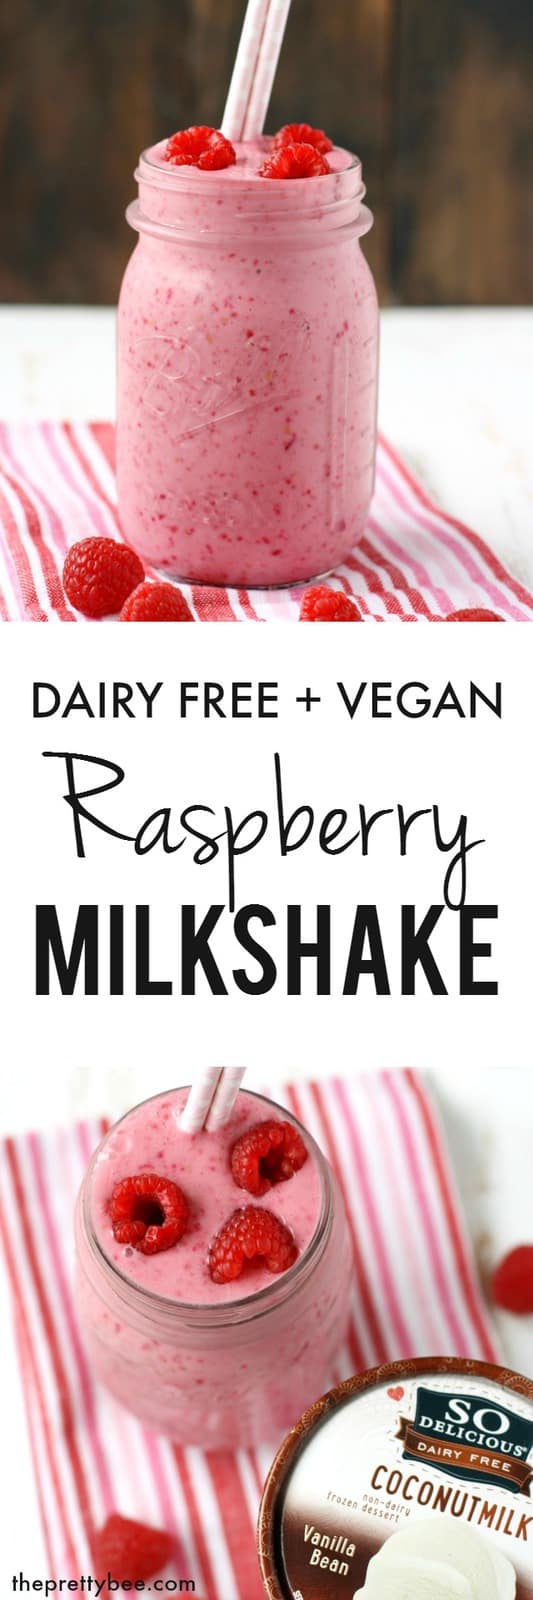 A creamy and delicious dairy free raspberry milkshake with a secret healthy ingredient! #ad #WellnessYourWay @So_Delicious @Kroger